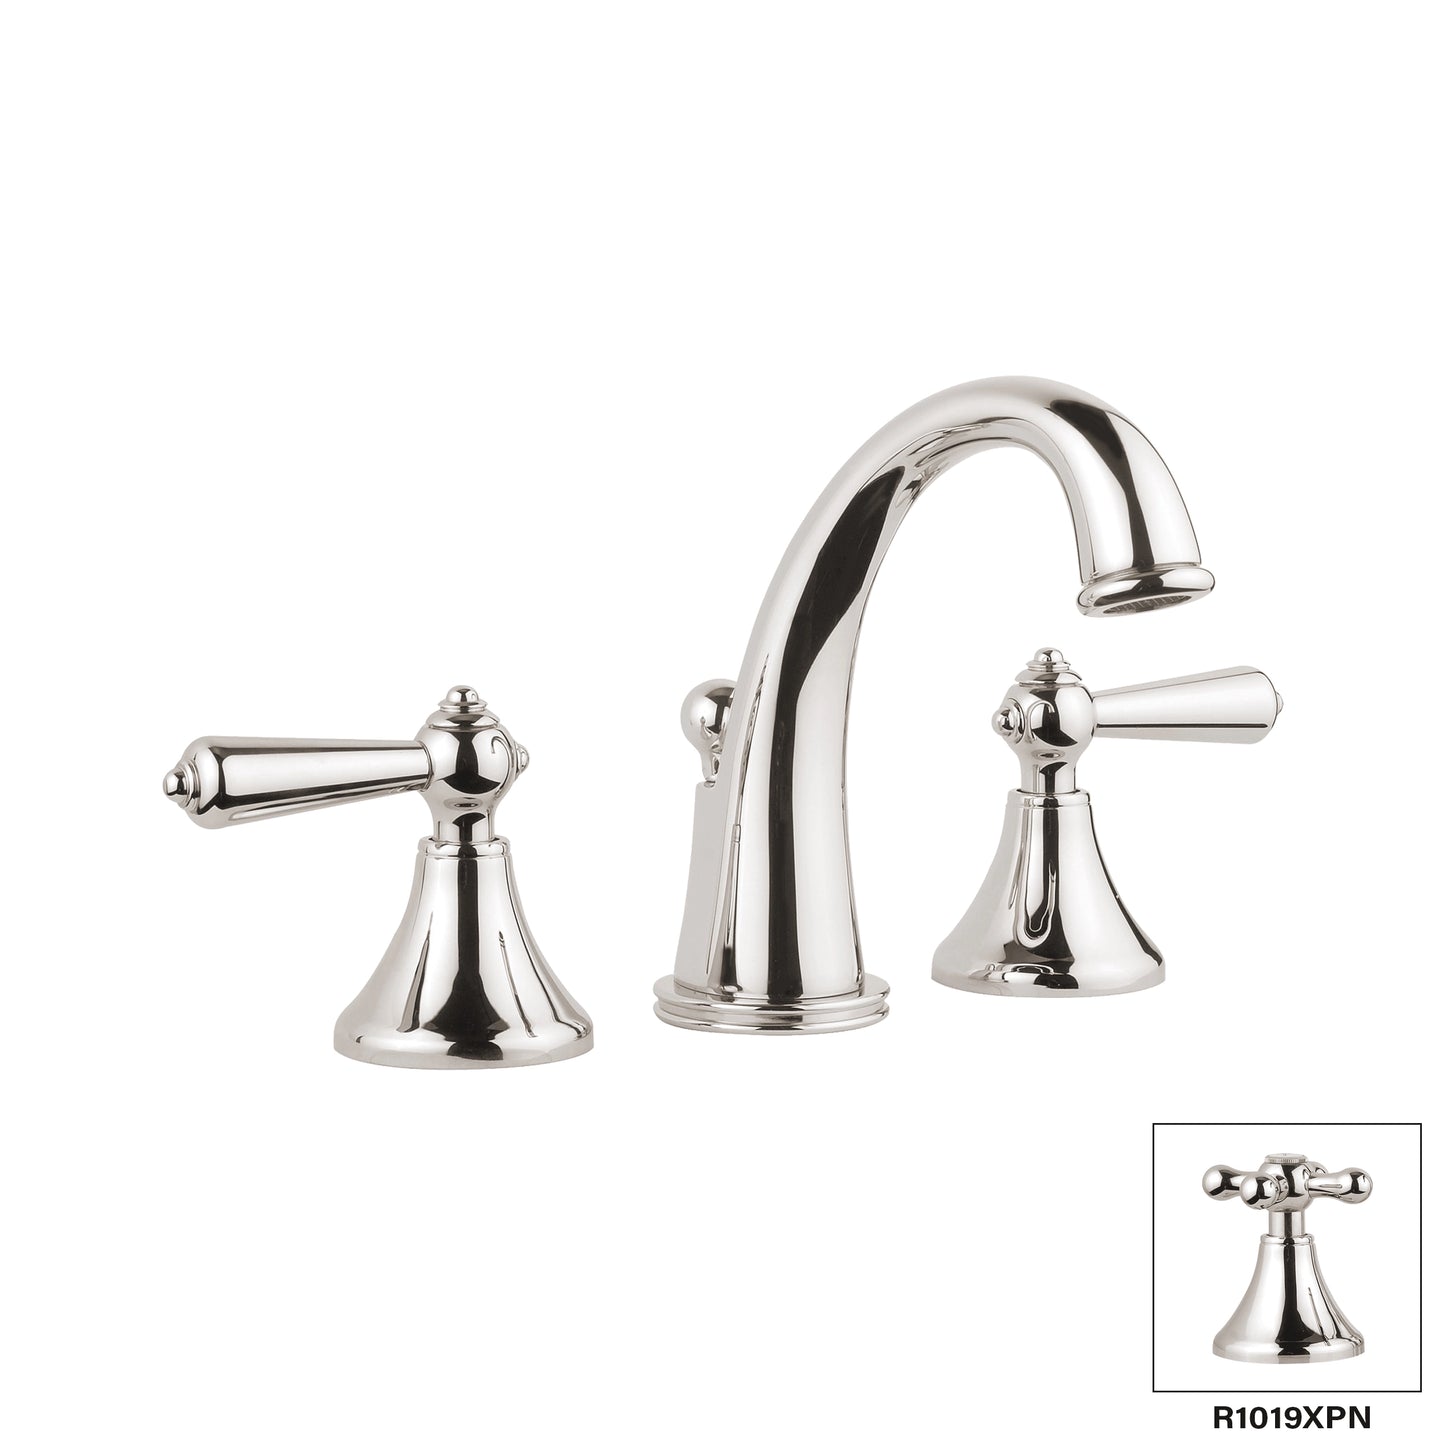 Aquadesign Products Widespread Lav – Drain Included (London R1019L) - Polished Nickel